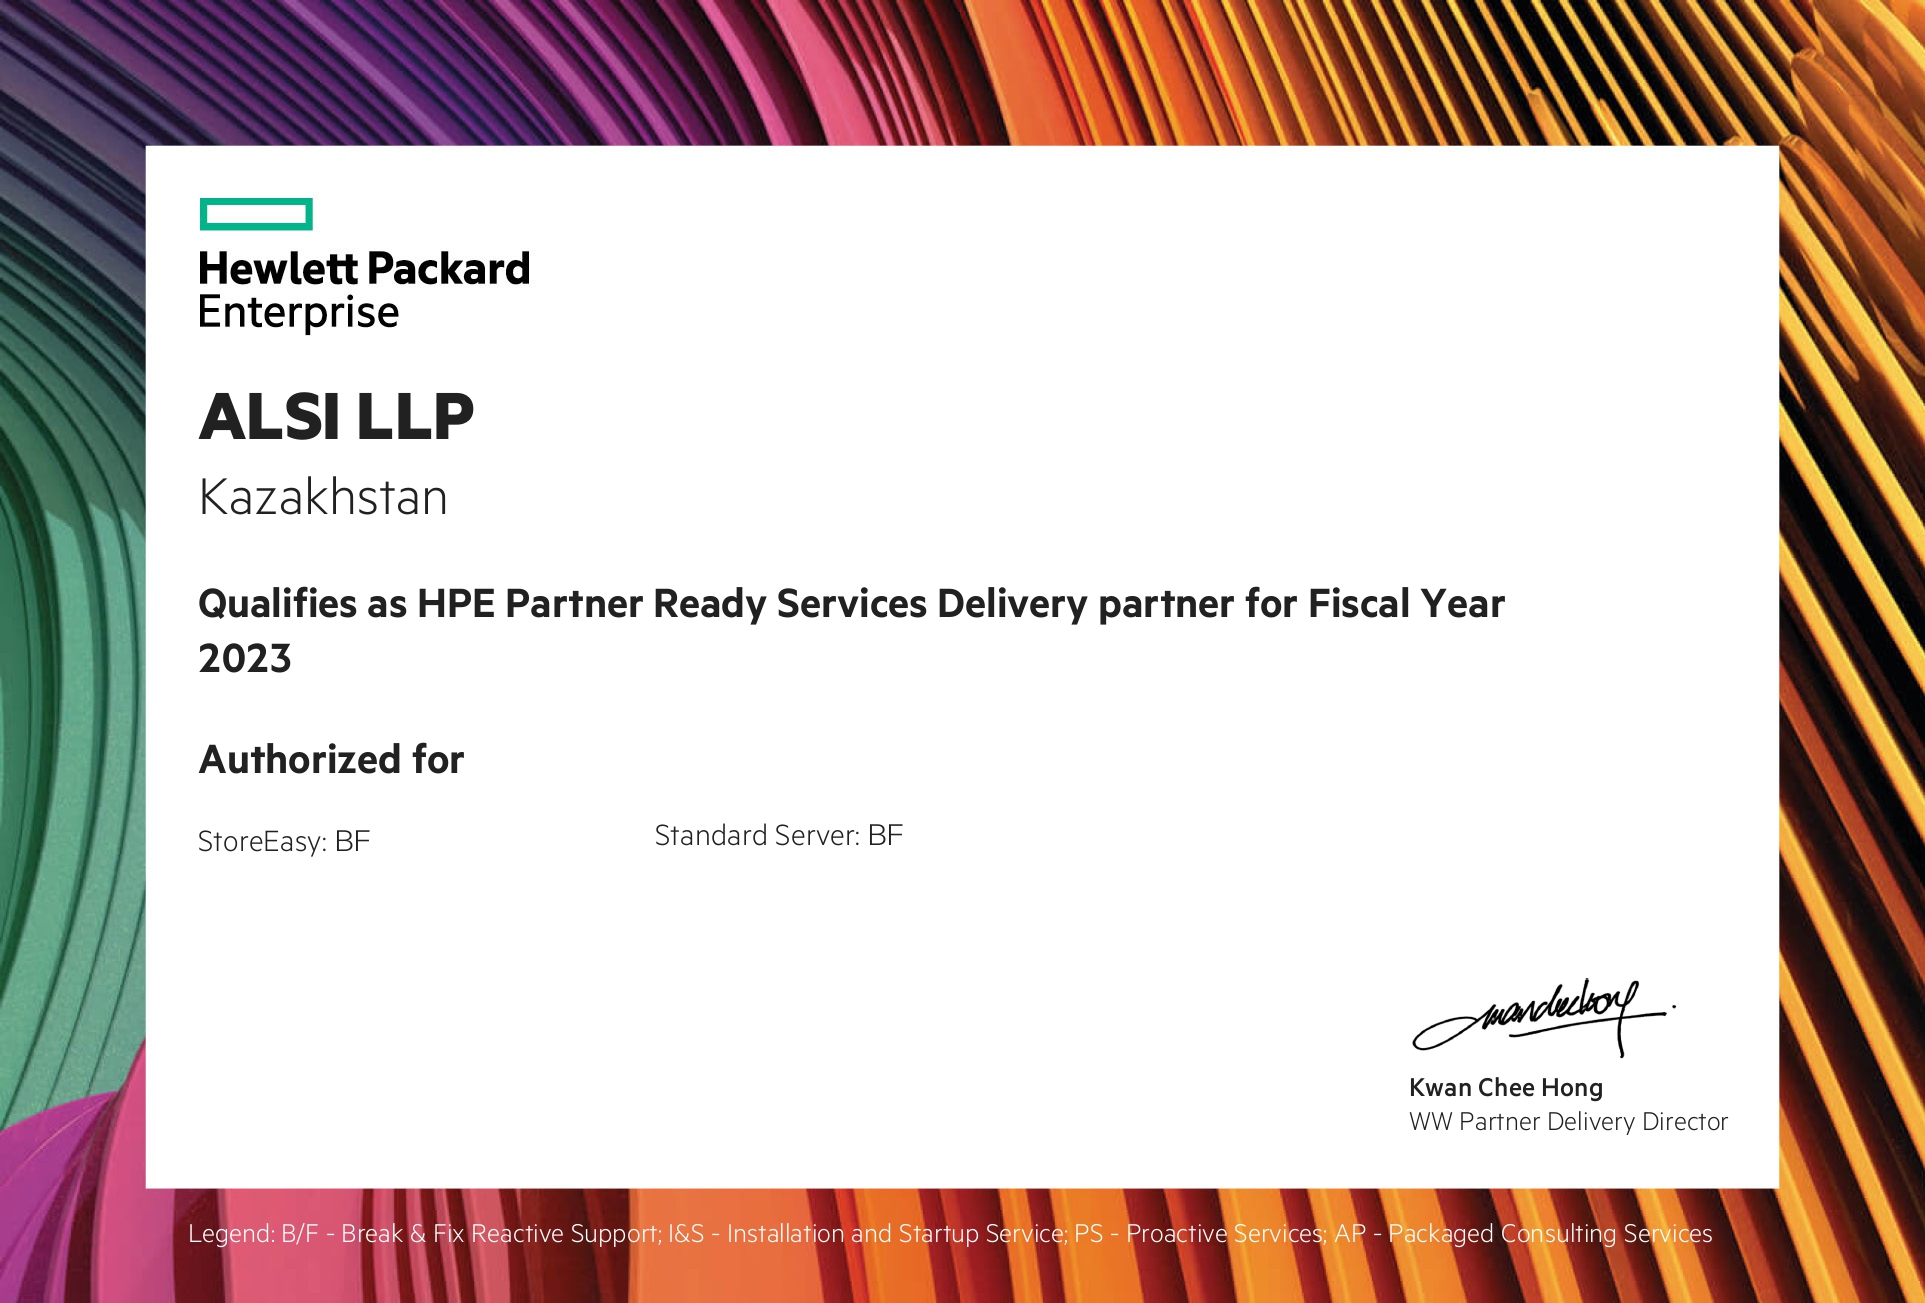 HPE Services Delivery